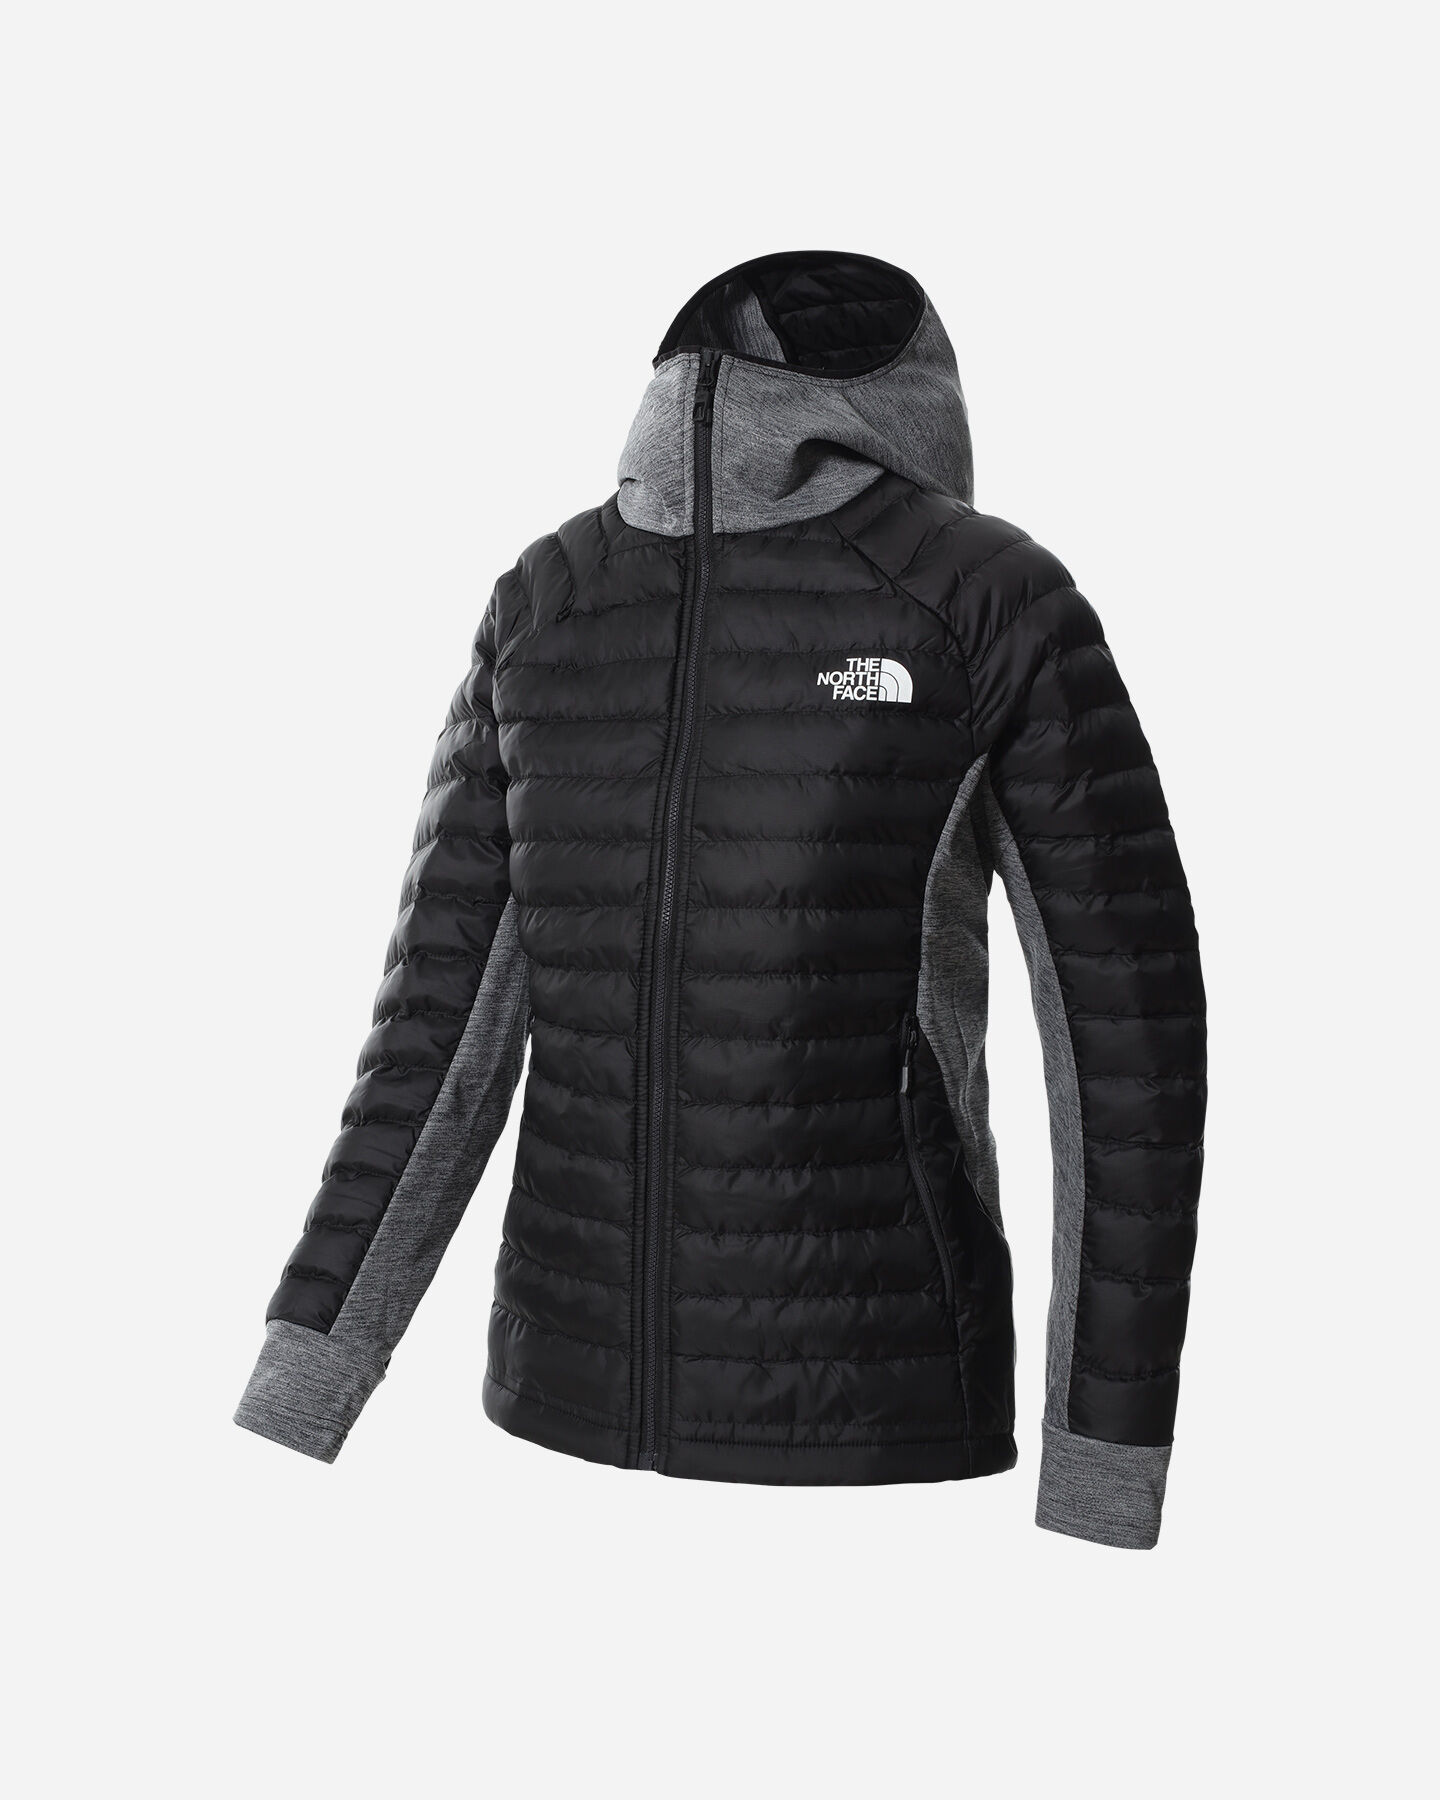  Giacca outdoor THE NORTH FACE  HYBRID INSULATION W S5423040|43M|M scatto 0